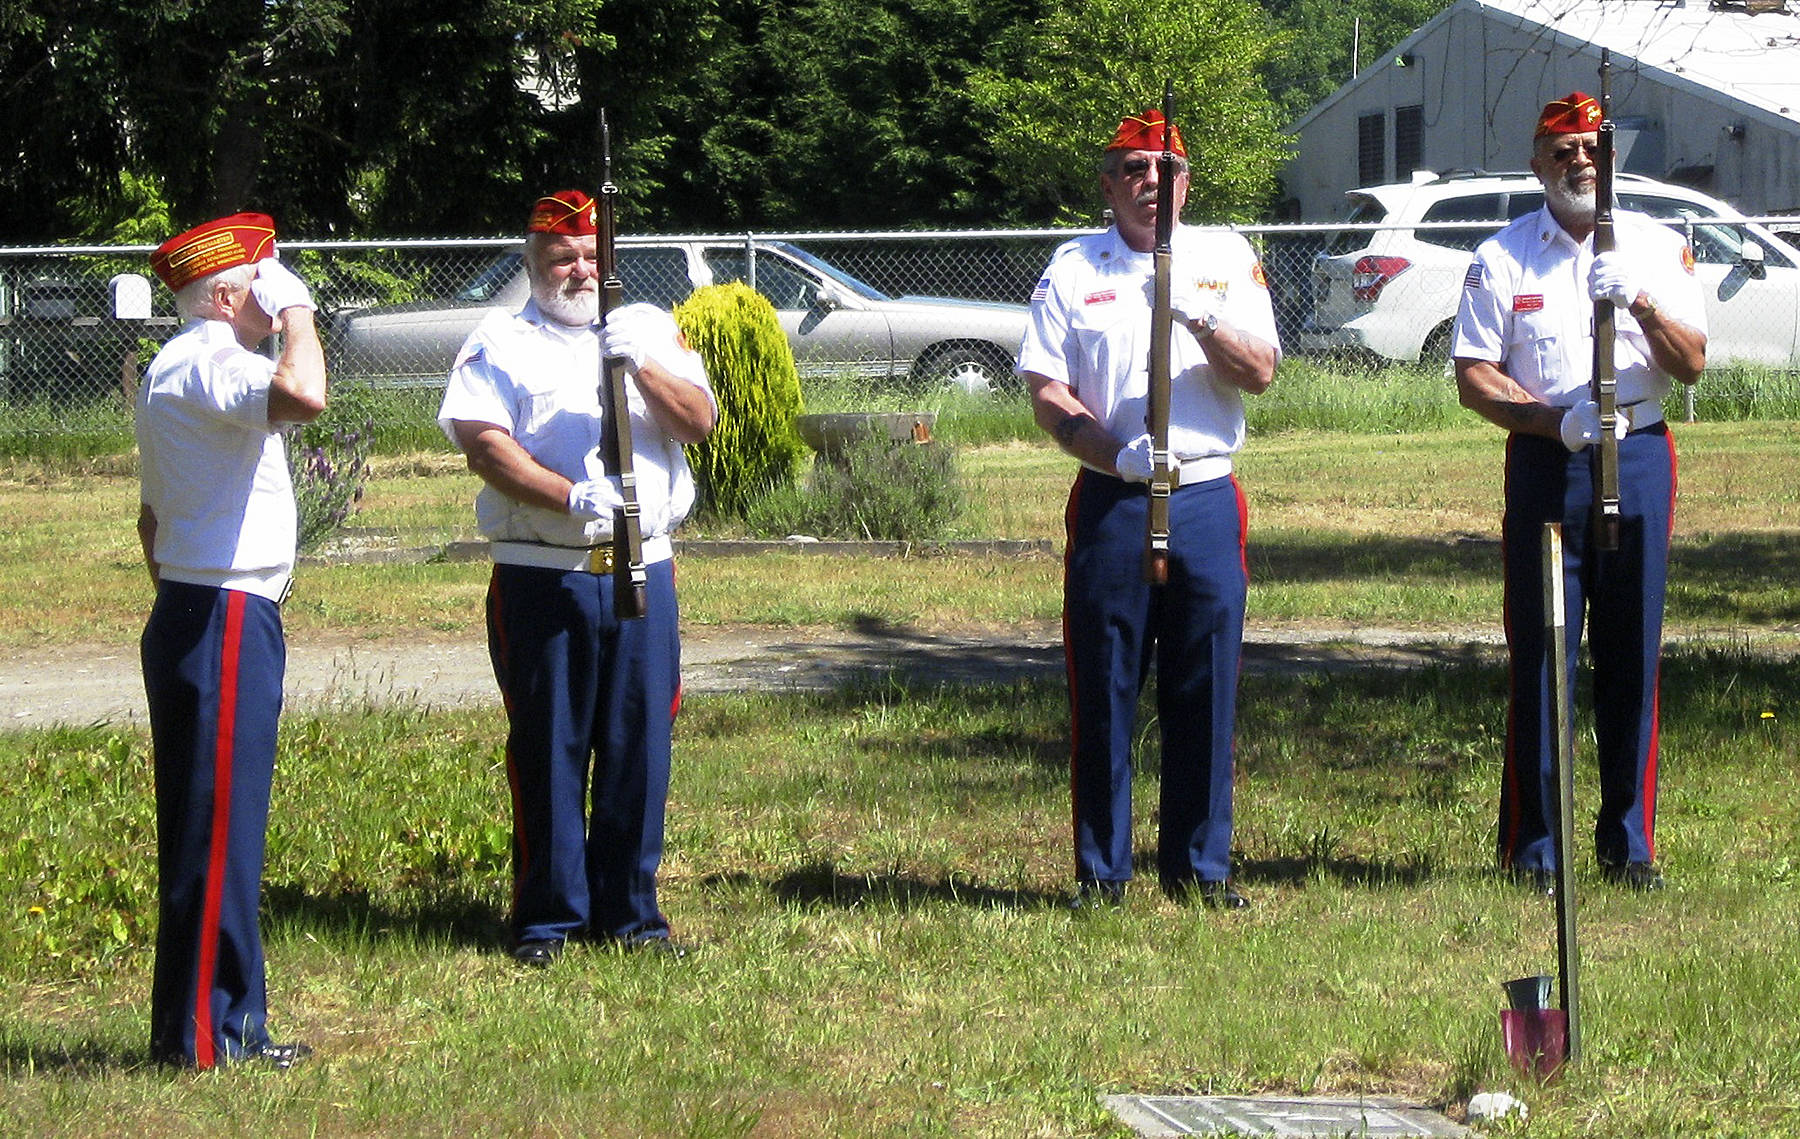 Memorial Day ceremonies at Bayview Cemetery featured a 21-gun rifle salute by members of the Marine League of South Whidbey. The League conducts the event each year to honor those who have died in combat.                                (Photos by Dave Felice/for the South Whidbey Record)